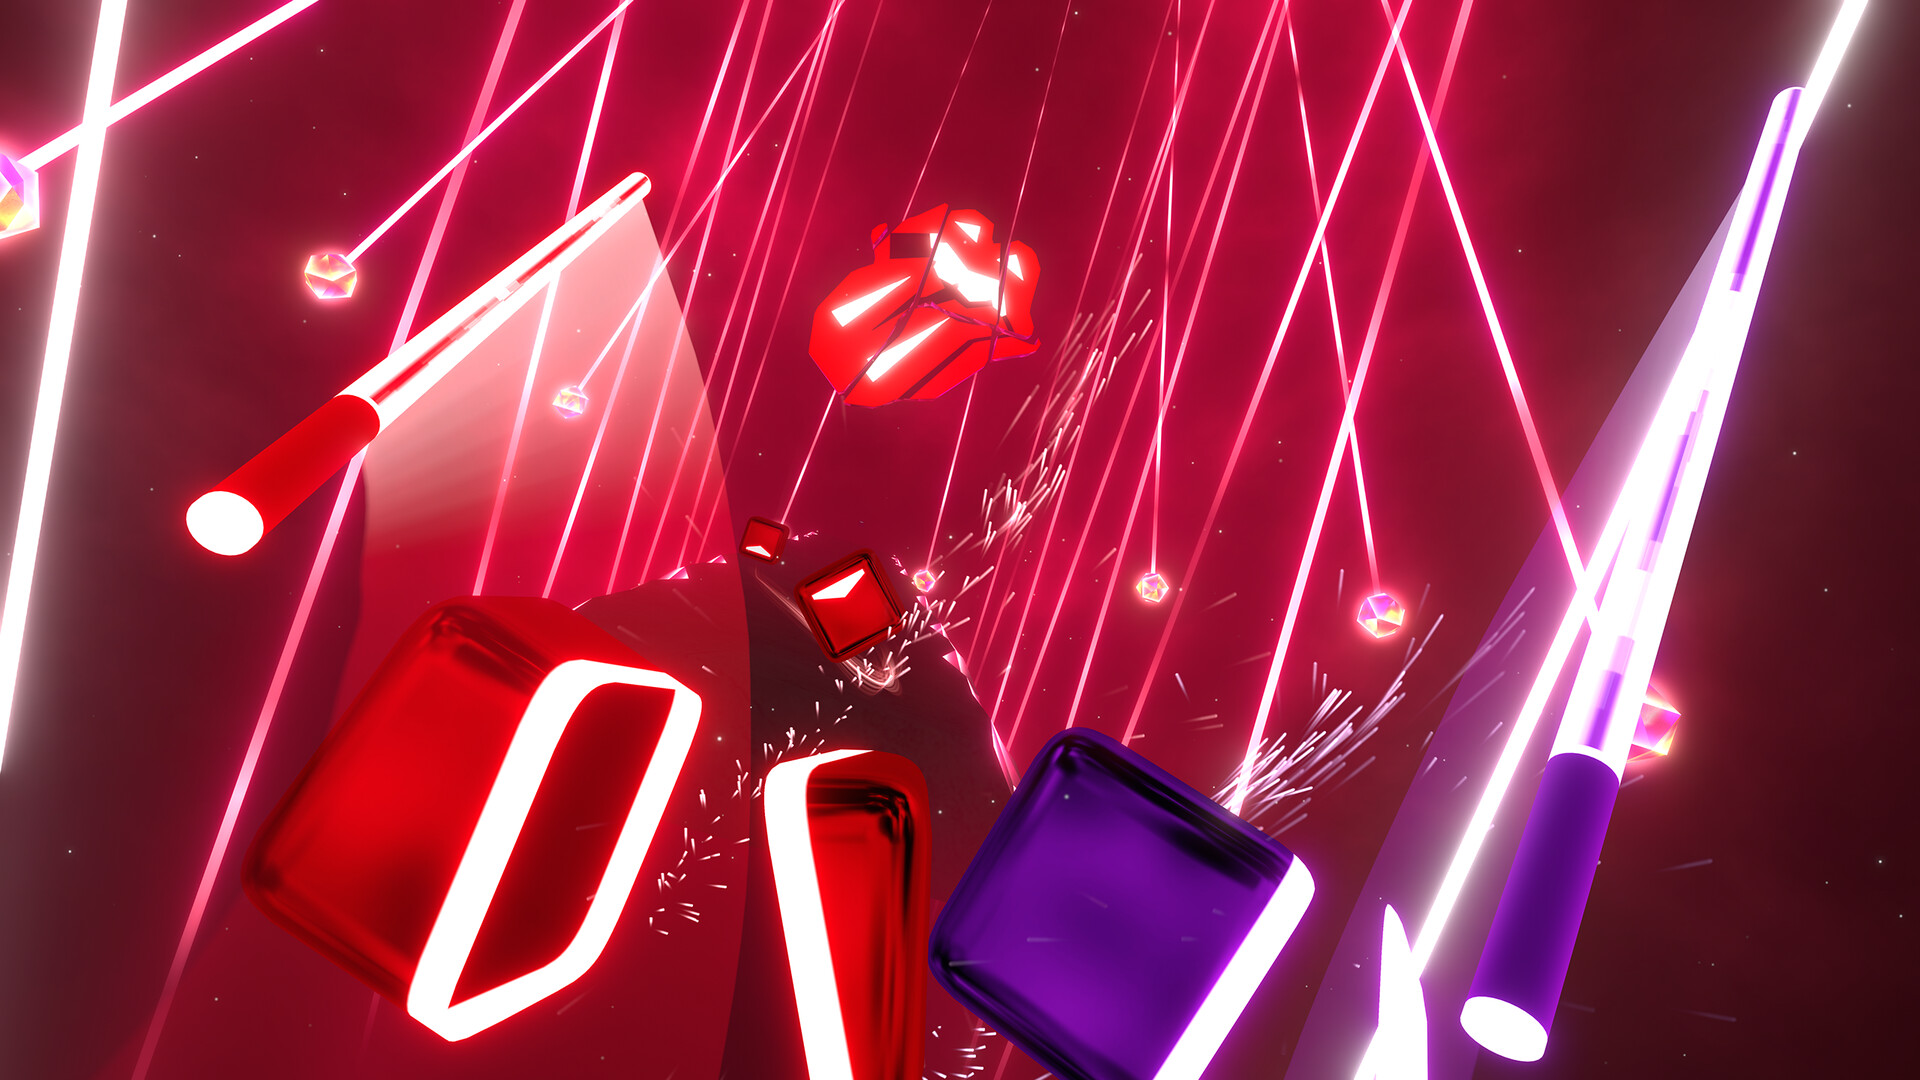 Beat Saber - The Rolling Stones - "(I Can’t Get No) Satisfaction" Featured Screenshot #1